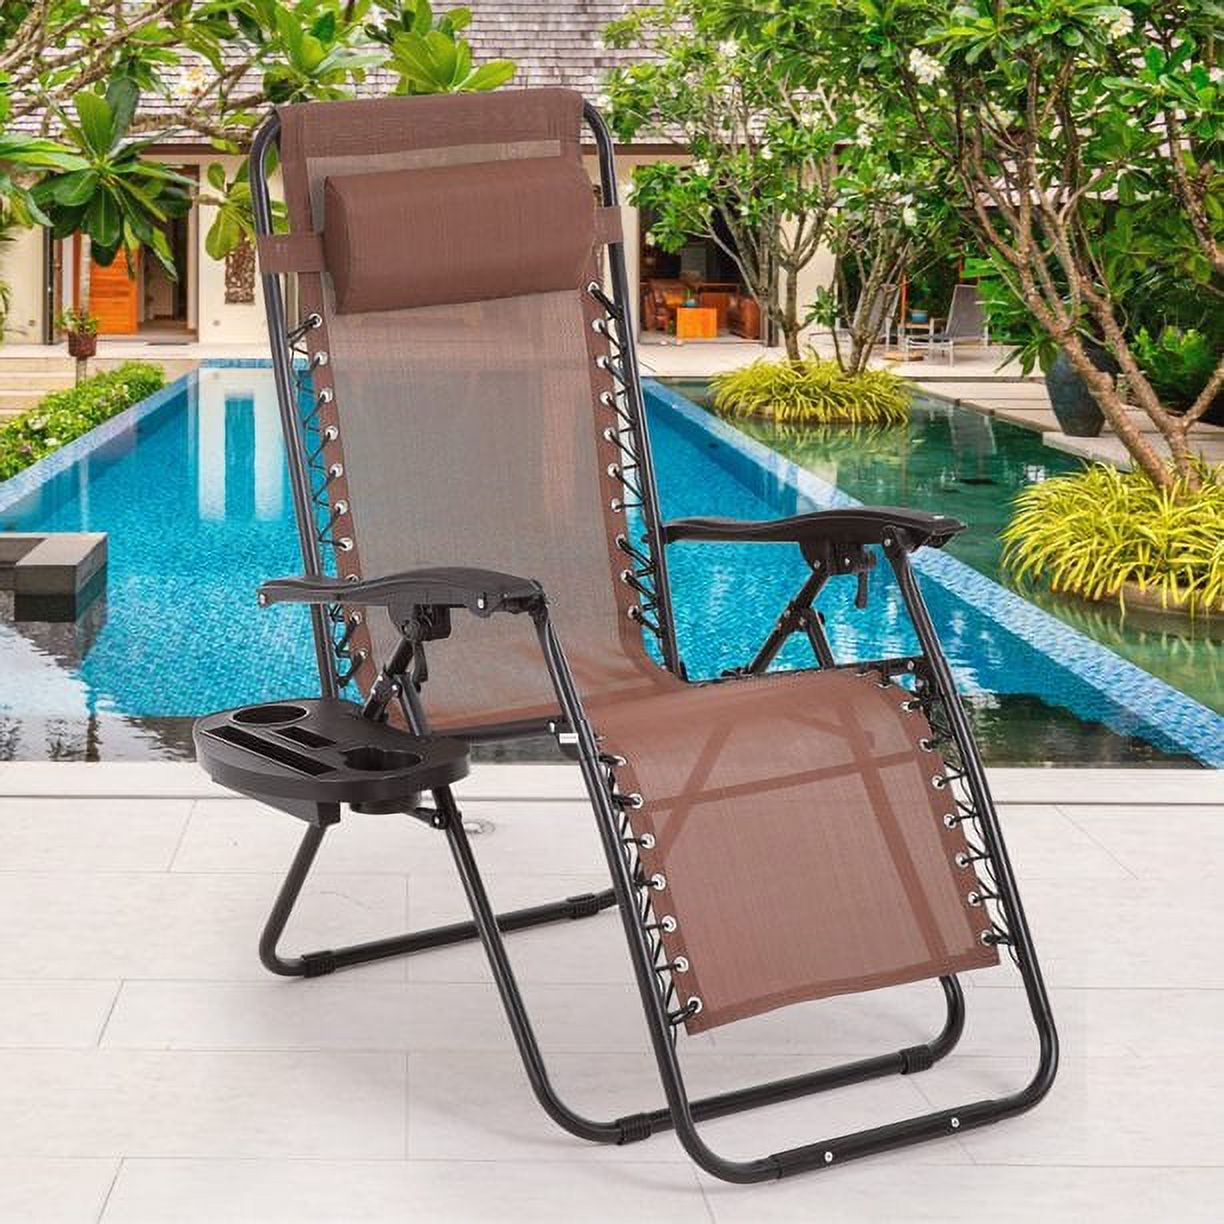 CozyBox Zero Gravity Chair Camp Reclining Lounge Chair Beach Chair Tanning Outdoor Lounge Patio Chair with Adjustable Pillow - image 1 of 2